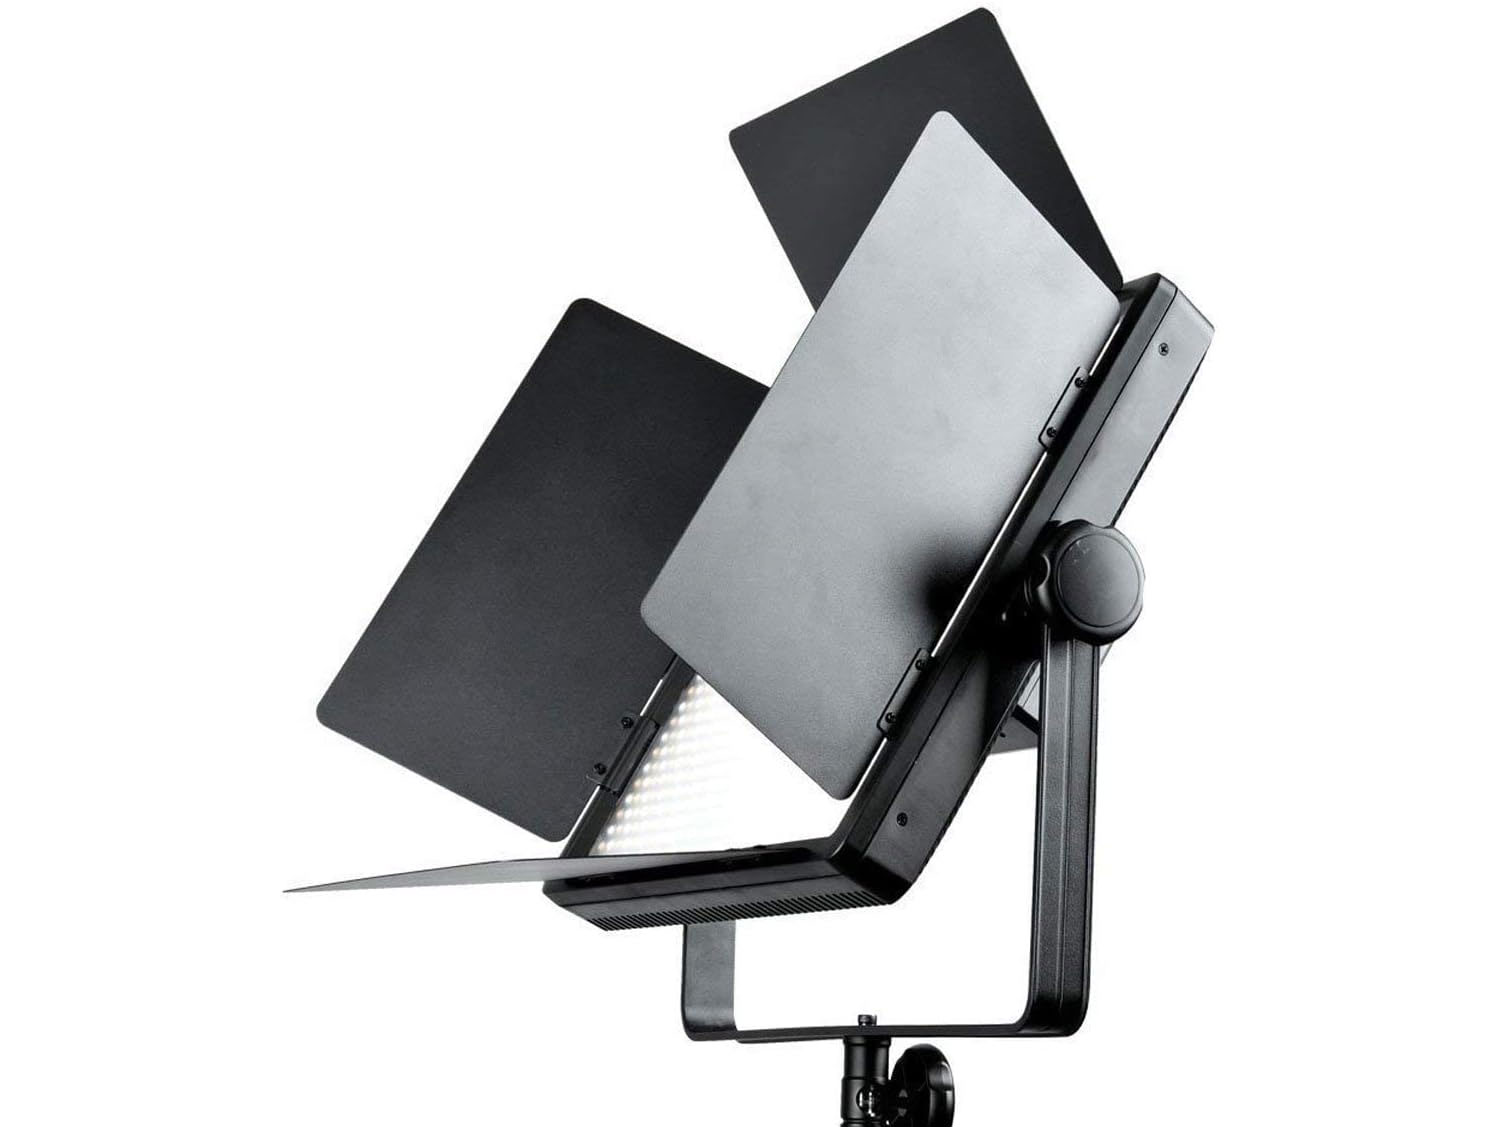 Compact and Portable Design - LED Video Light